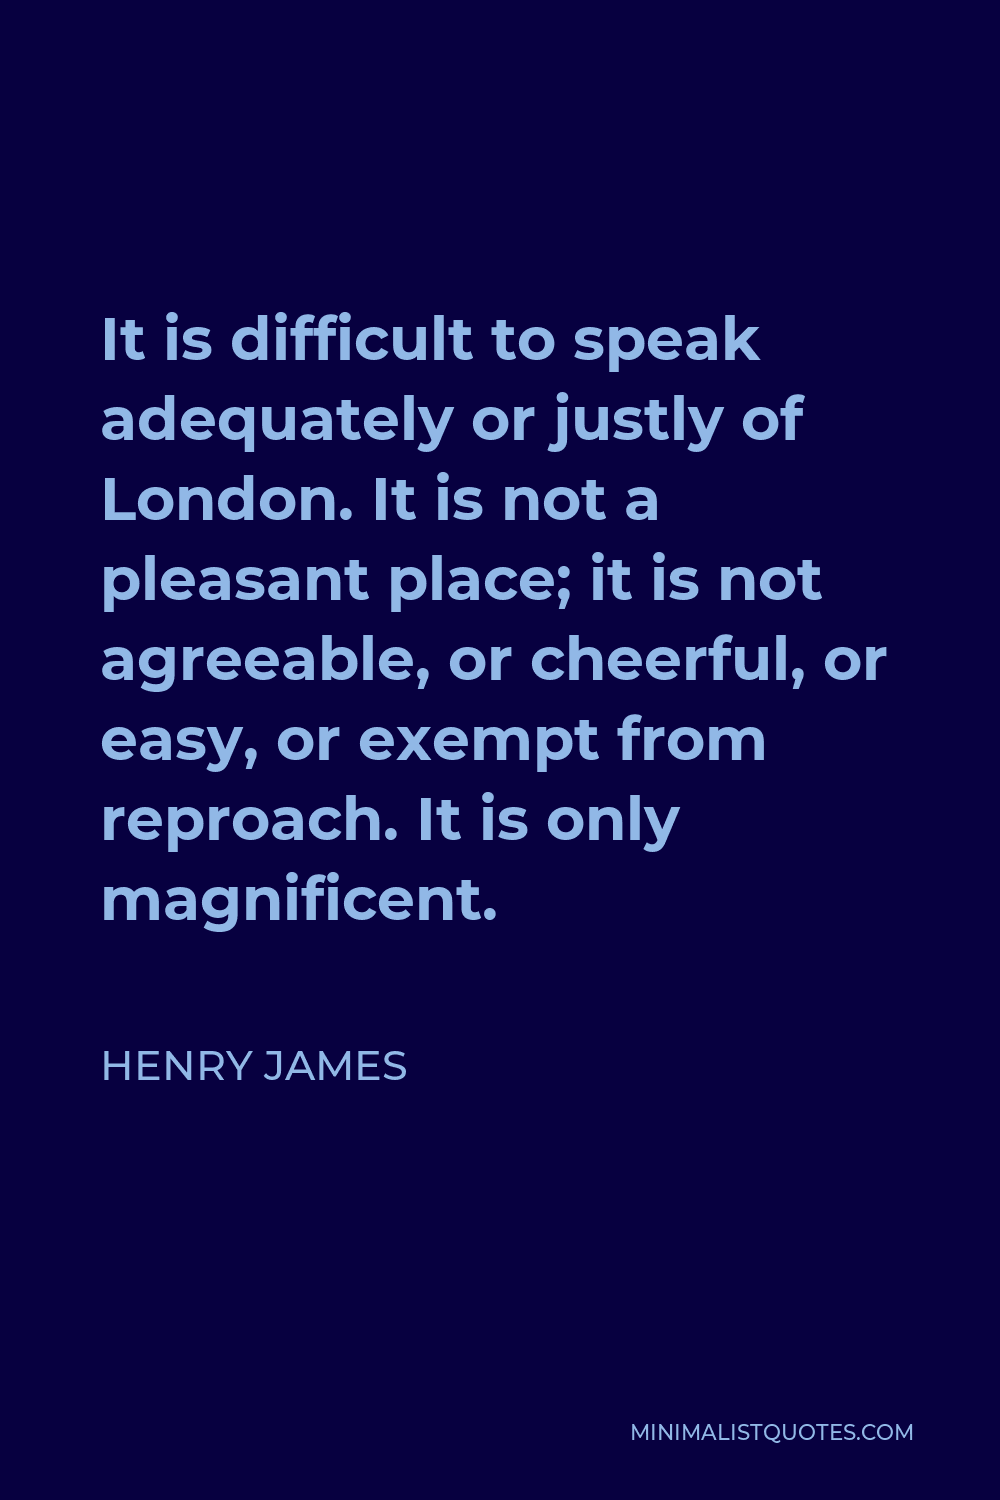 Henry James Quote - It is difficult to speak adequately or justly of London. It is not a pleasant place; it is not agreeable, or cheerful, or easy, or exempt from reproach. It is only magnificent.